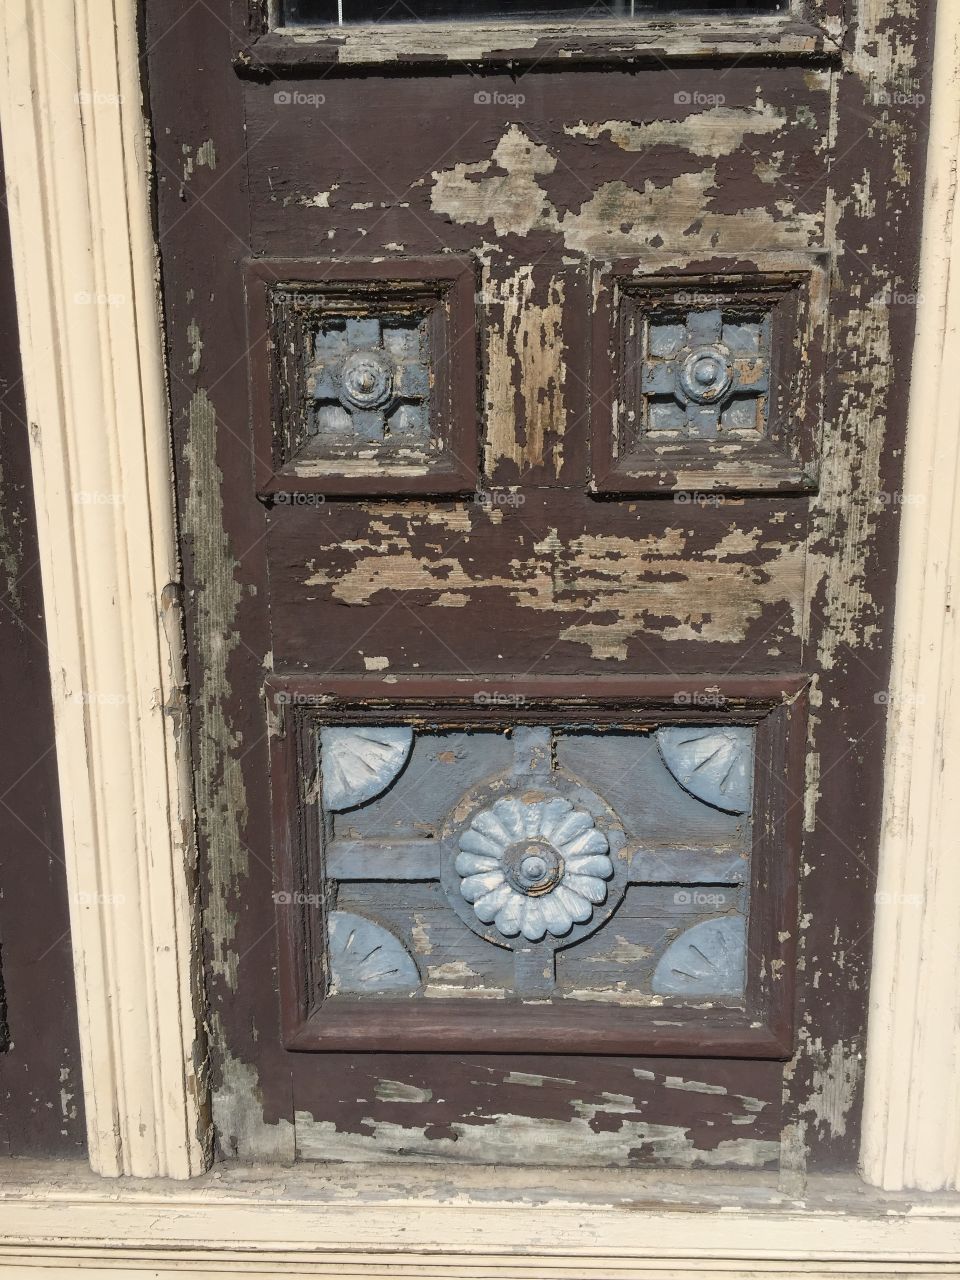 Cool old door in Port Townsend, Washington, United States